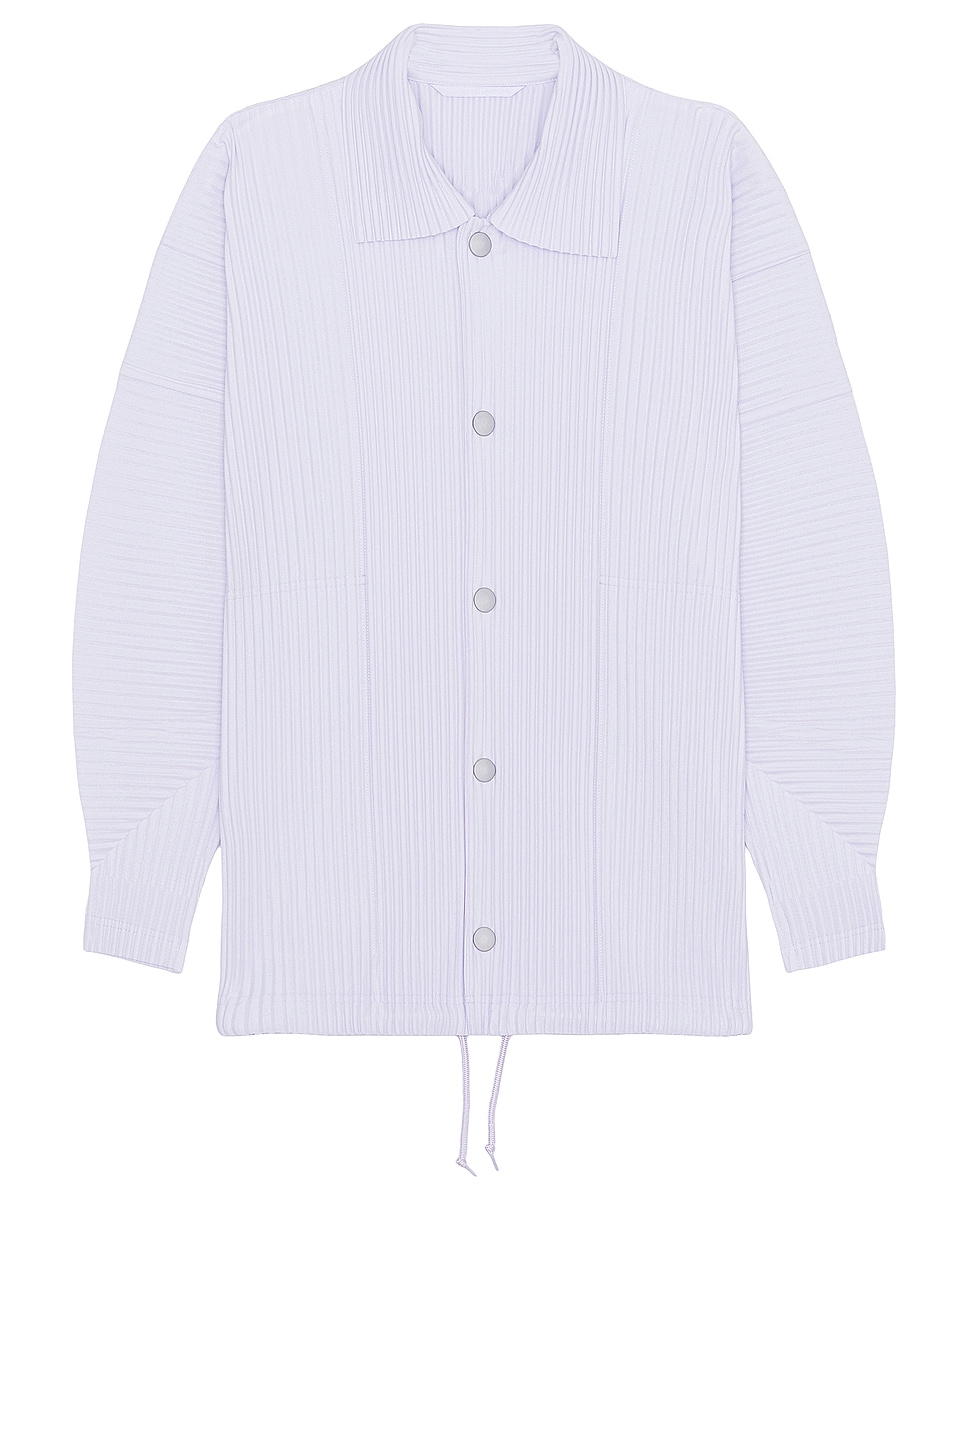 Image 1 of Homme Plisse Issey Miyake Shirt in Soft Lavender